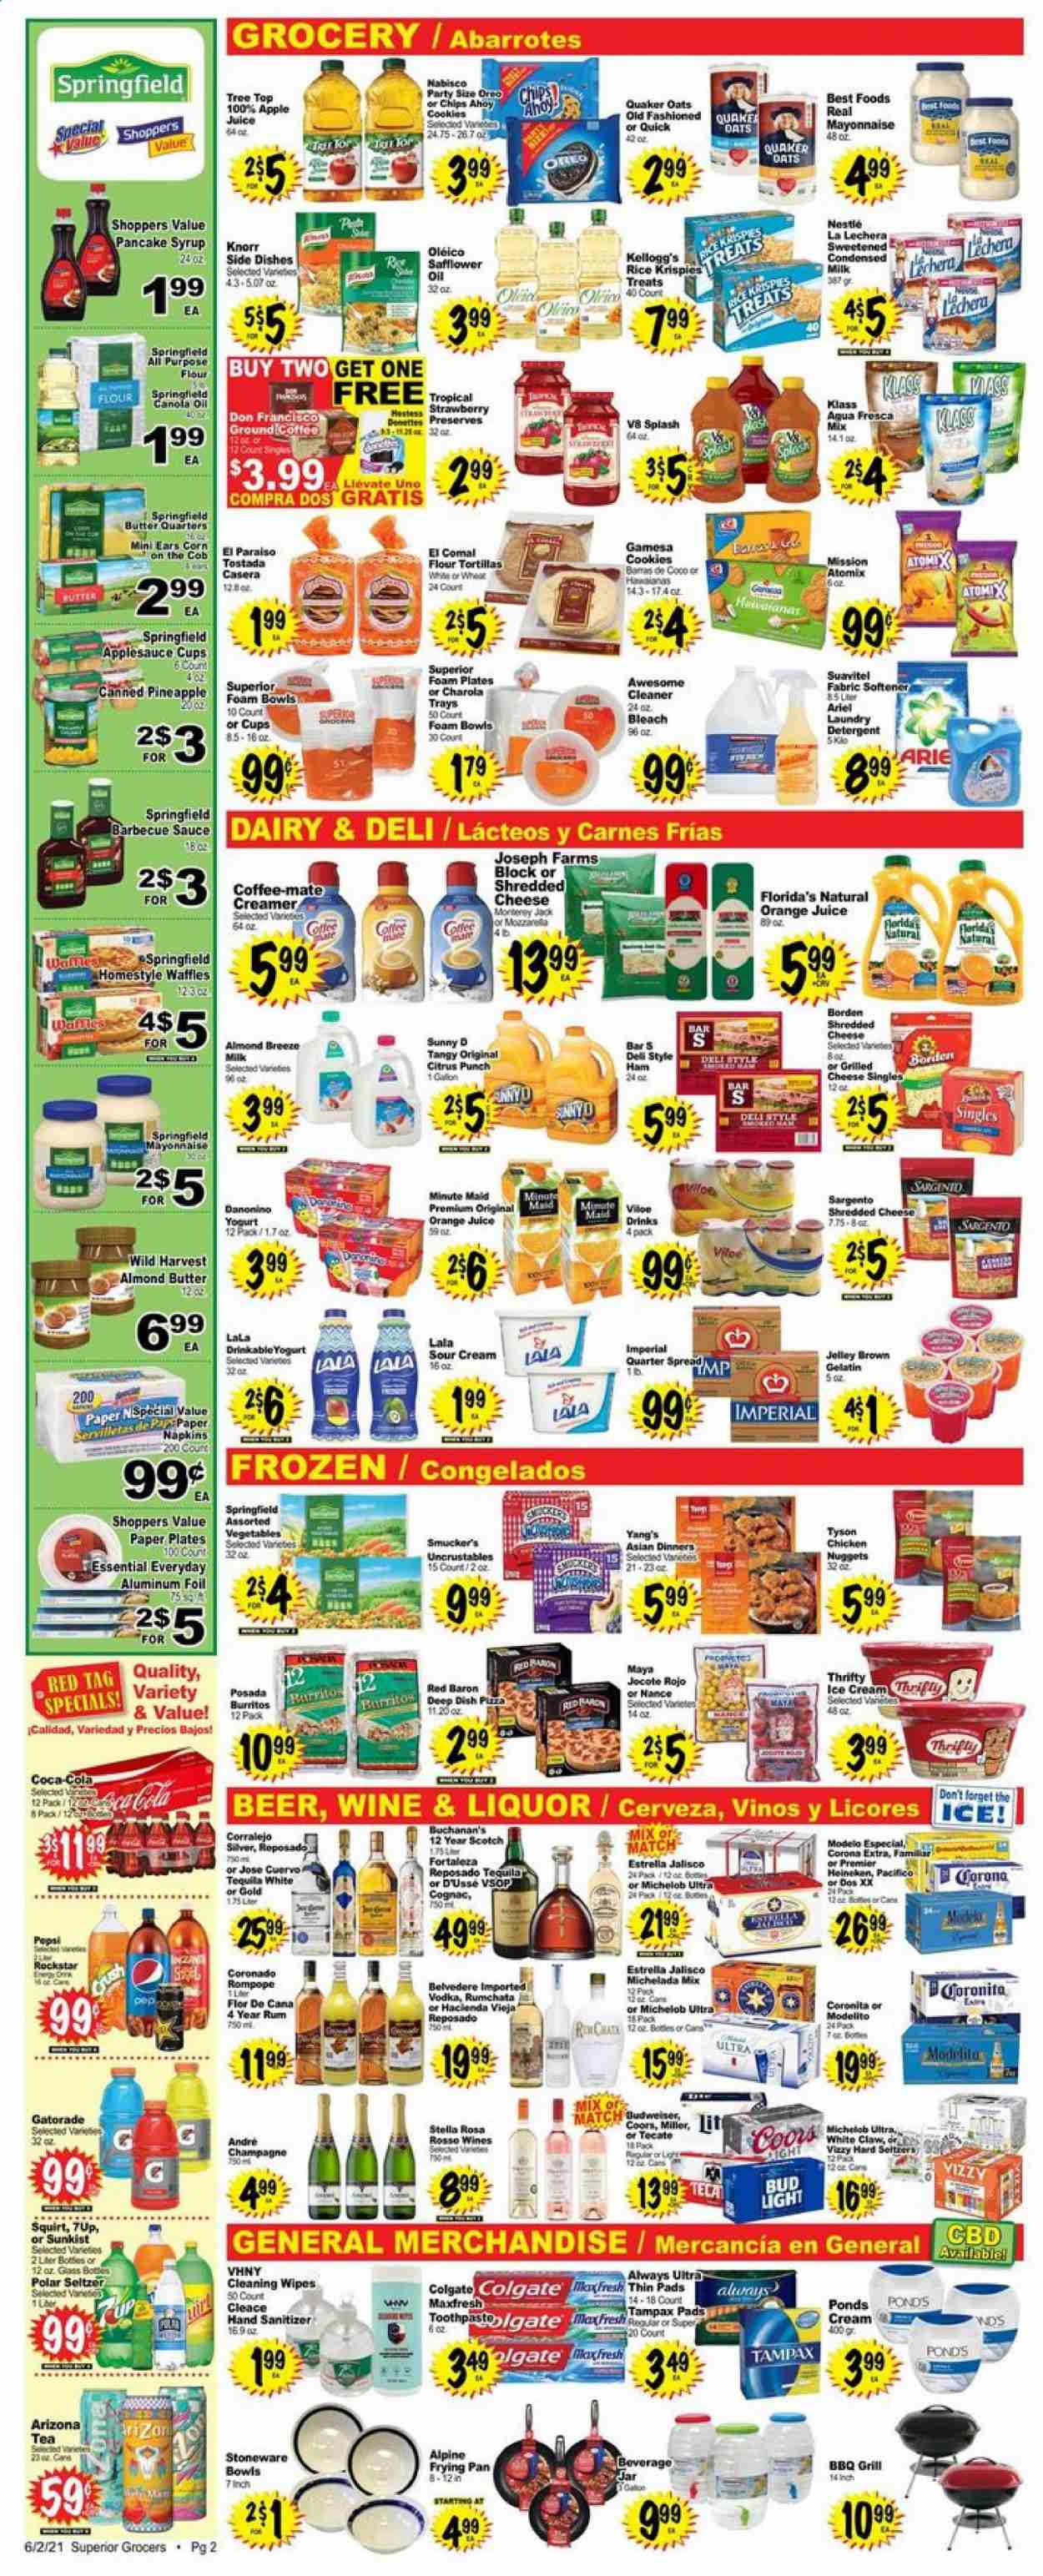 thumbnail - Superior Grocers Flyer - 06/02/2021 - 06/08/2021 - Sales products - Coors, Michelob, tortillas, flour tortillas, waffles, corn, Wild Harvest, pineapple, pizza, nuggets, Knorr, sauce, burrito, Quaker, ham, Monterey Jack cheese, shredded cheese, Sargento, yoghurt, milk, condensed milk, Almond Breeze, almond butter, sour cream, creamer, mayonnaise, ice cream, Red Baron, cookies, Nestlé, Kellogg's, Florida's Natural, oats, Rice Krispies, BBQ sauce, safflower oil, apple sauce, pancake syrup, syrup, apple juice, Pepsi, orange juice, juice, 7UP, AriZona, Rockstar, Gatorade, fruit punch, seltzer water, tea, coffee, champagne, cognac, rum, tequila, vodka, liquor, White Claw, beer, Bud Light, Corona Extra, Heineken, Miller, Modelo, fabric softener, Ariel, bleach, laundry detergent, Rin, Colgate, cleansing wipes, POND'S, plate, pan, cup, stoneware, aluminium foil, jar, paper, paper plate, foam plates. Page 2.